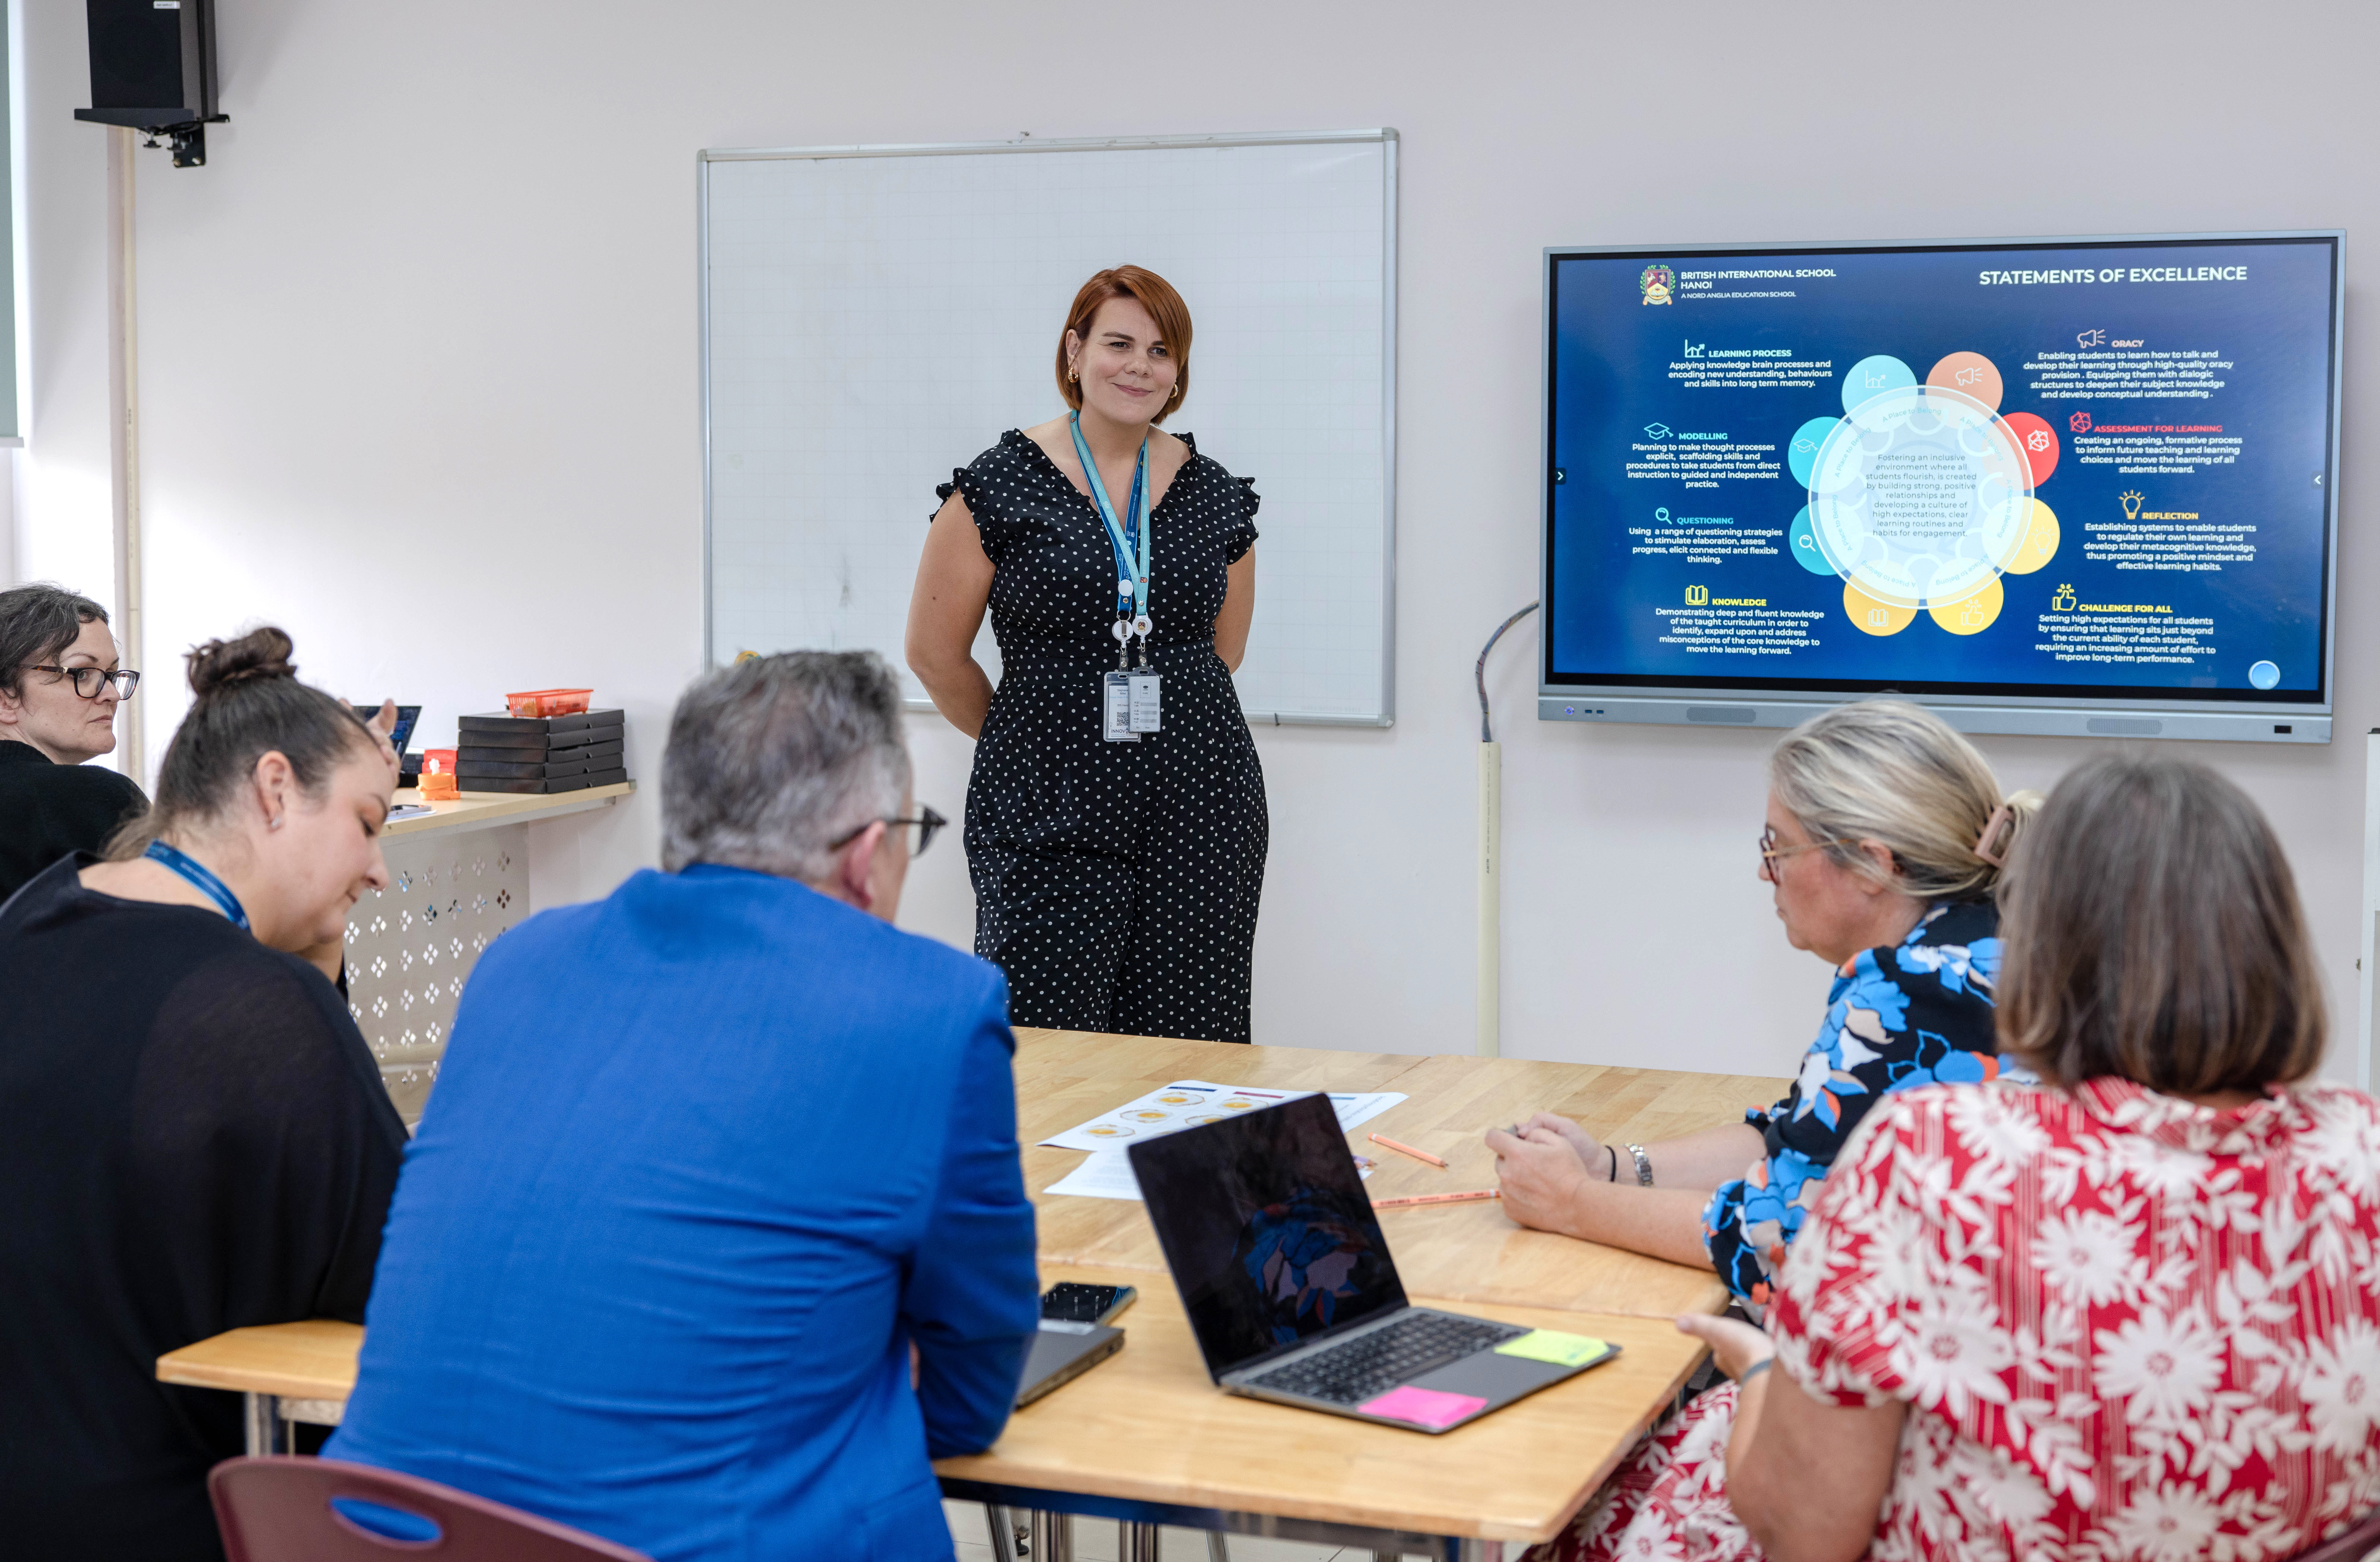 As an industry expert, Stephanie Miller spoke at this event about the artificial intelligence in education and oracy connection – sharing innovative approaches and inspiring methods.